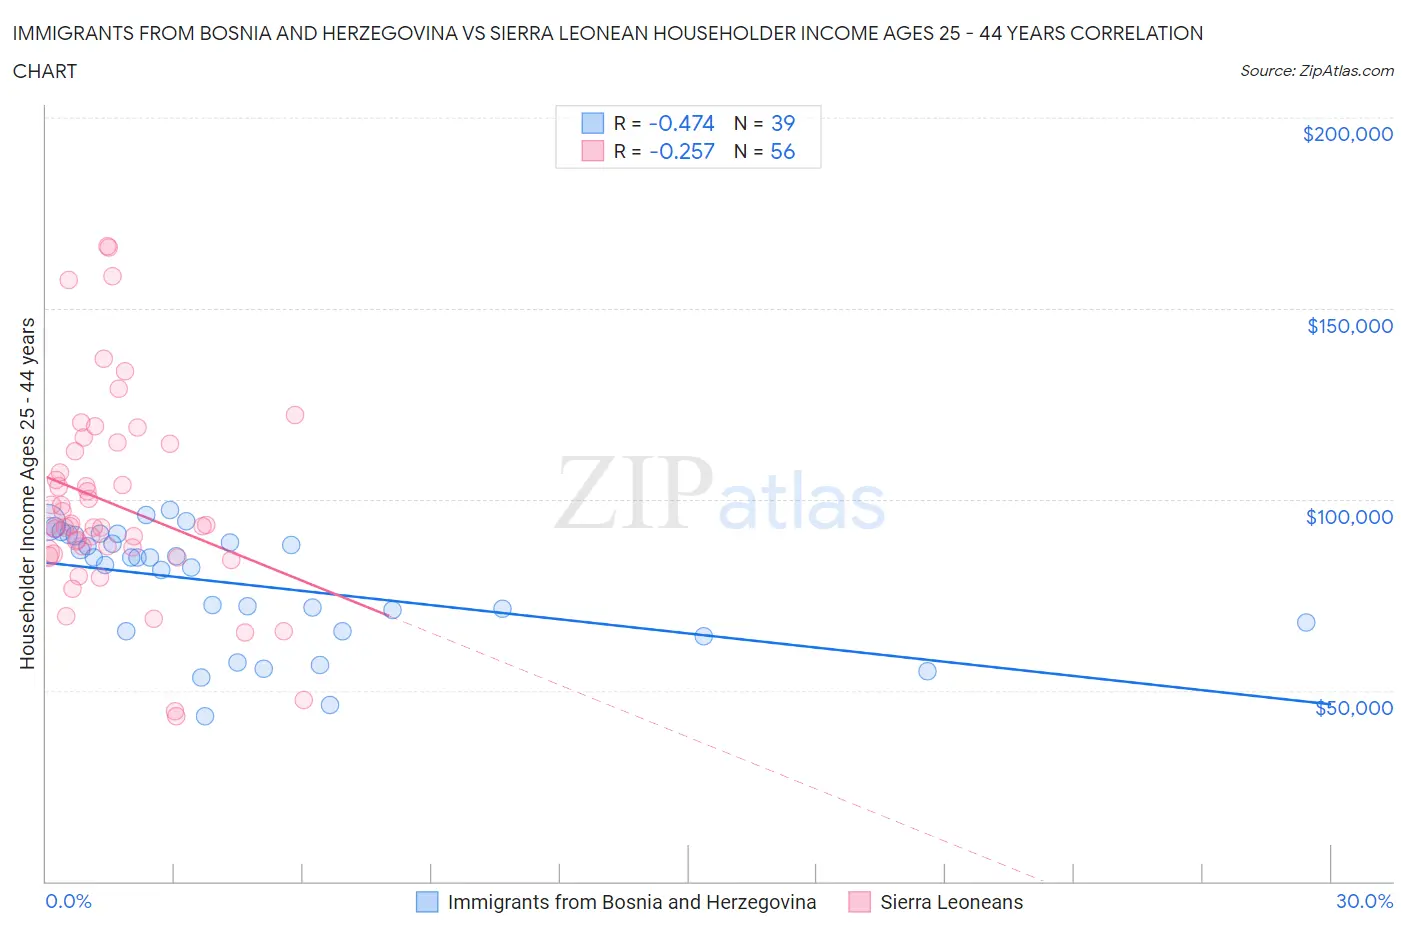 Immigrants from Bosnia and Herzegovina vs Sierra Leonean Householder Income Ages 25 - 44 years